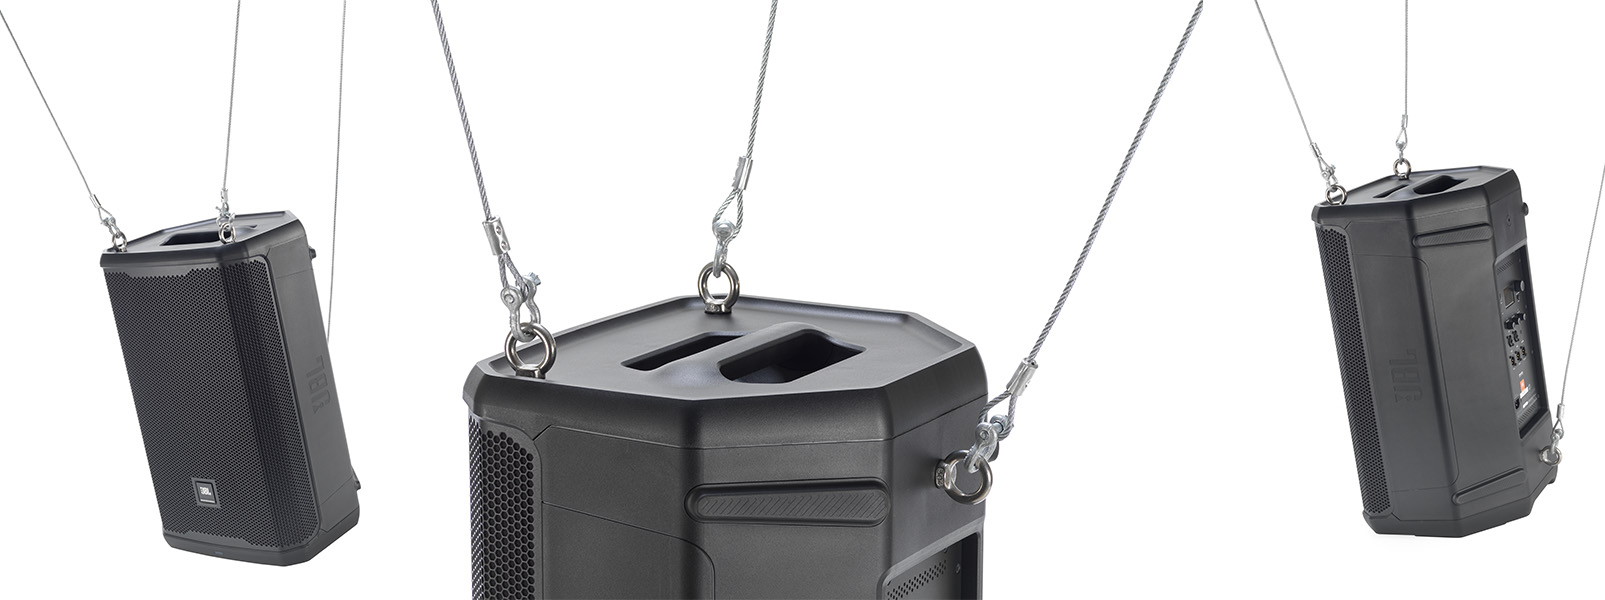 All the rigging and flying options you need JBL LAUNCHES PRX 900 SERIES